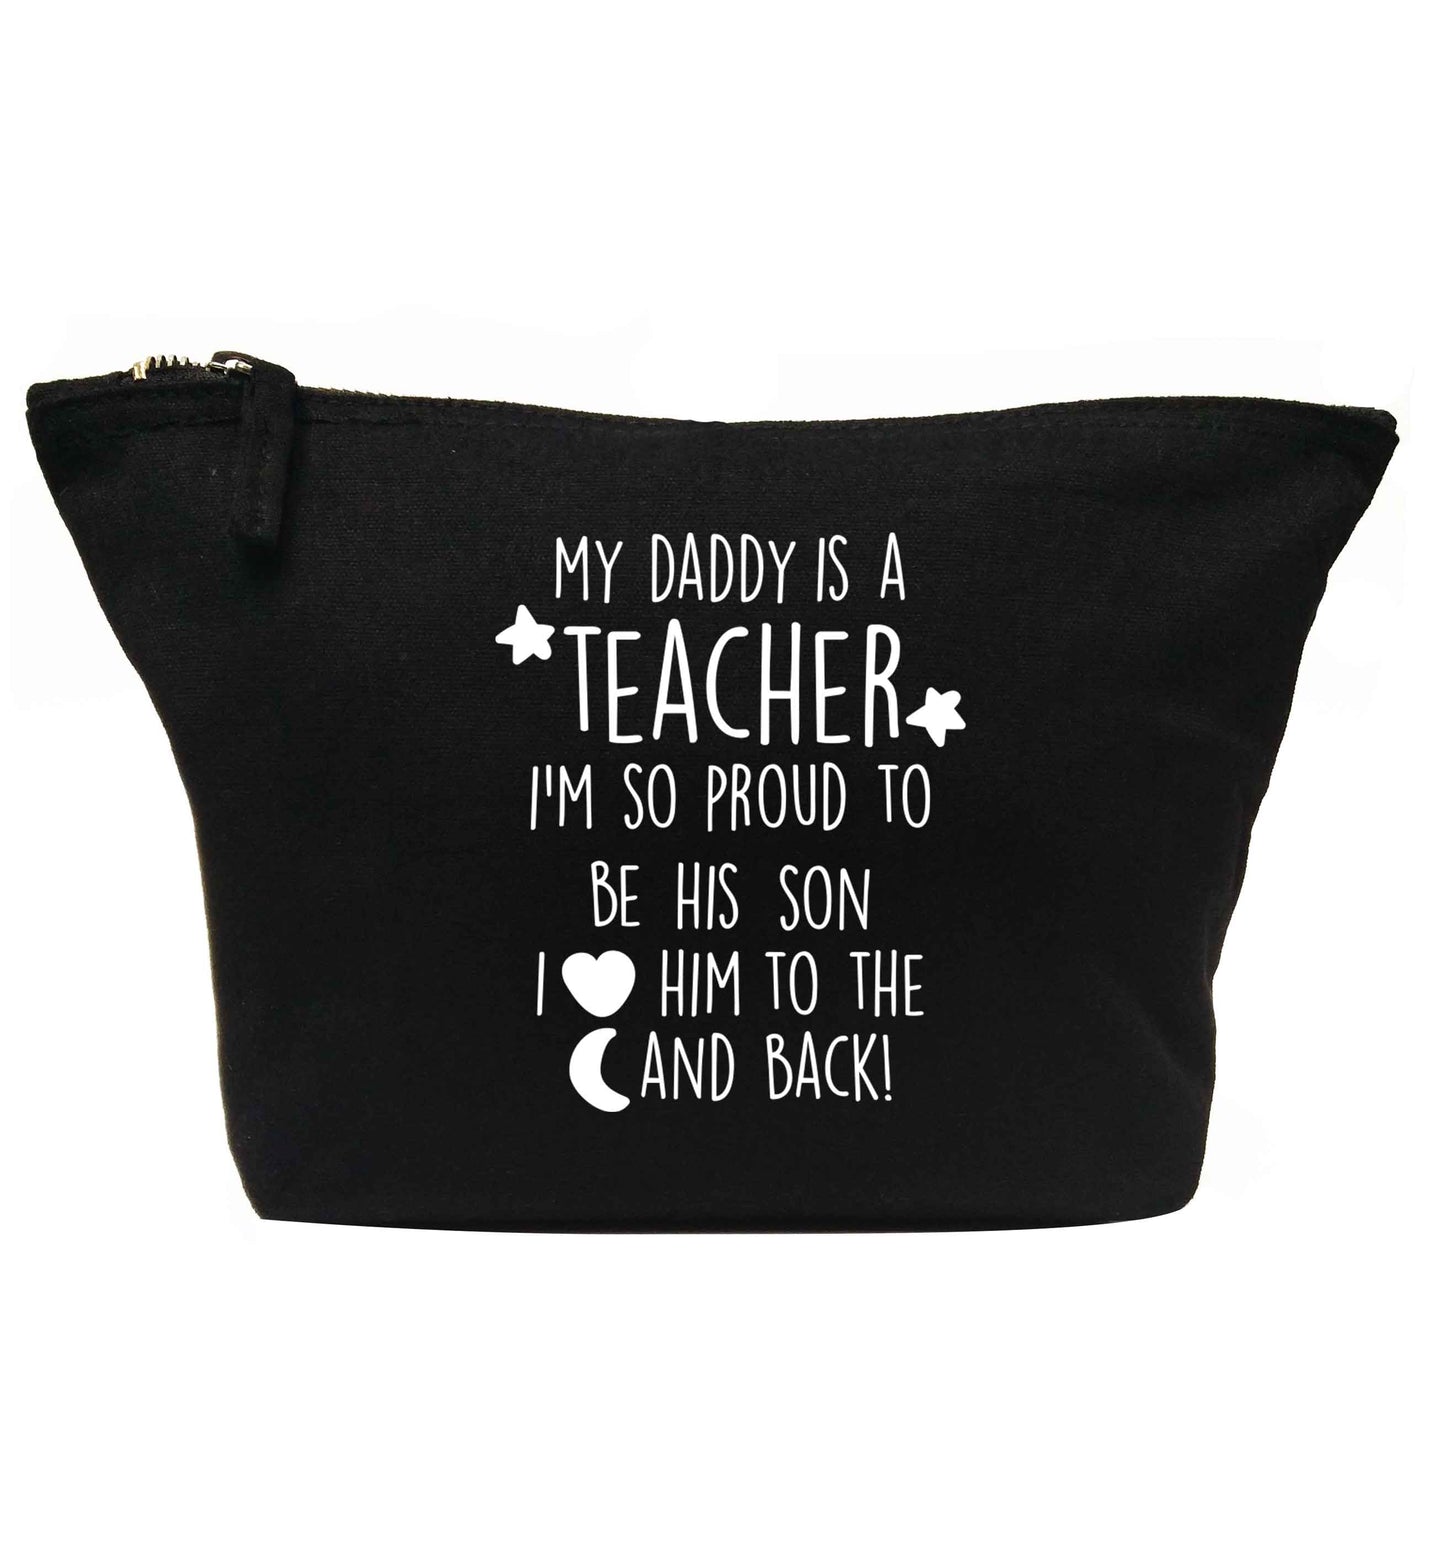 My daddy is a teacher I'm so proud to be his son I love her to the moon and back | Makeup / wash bag